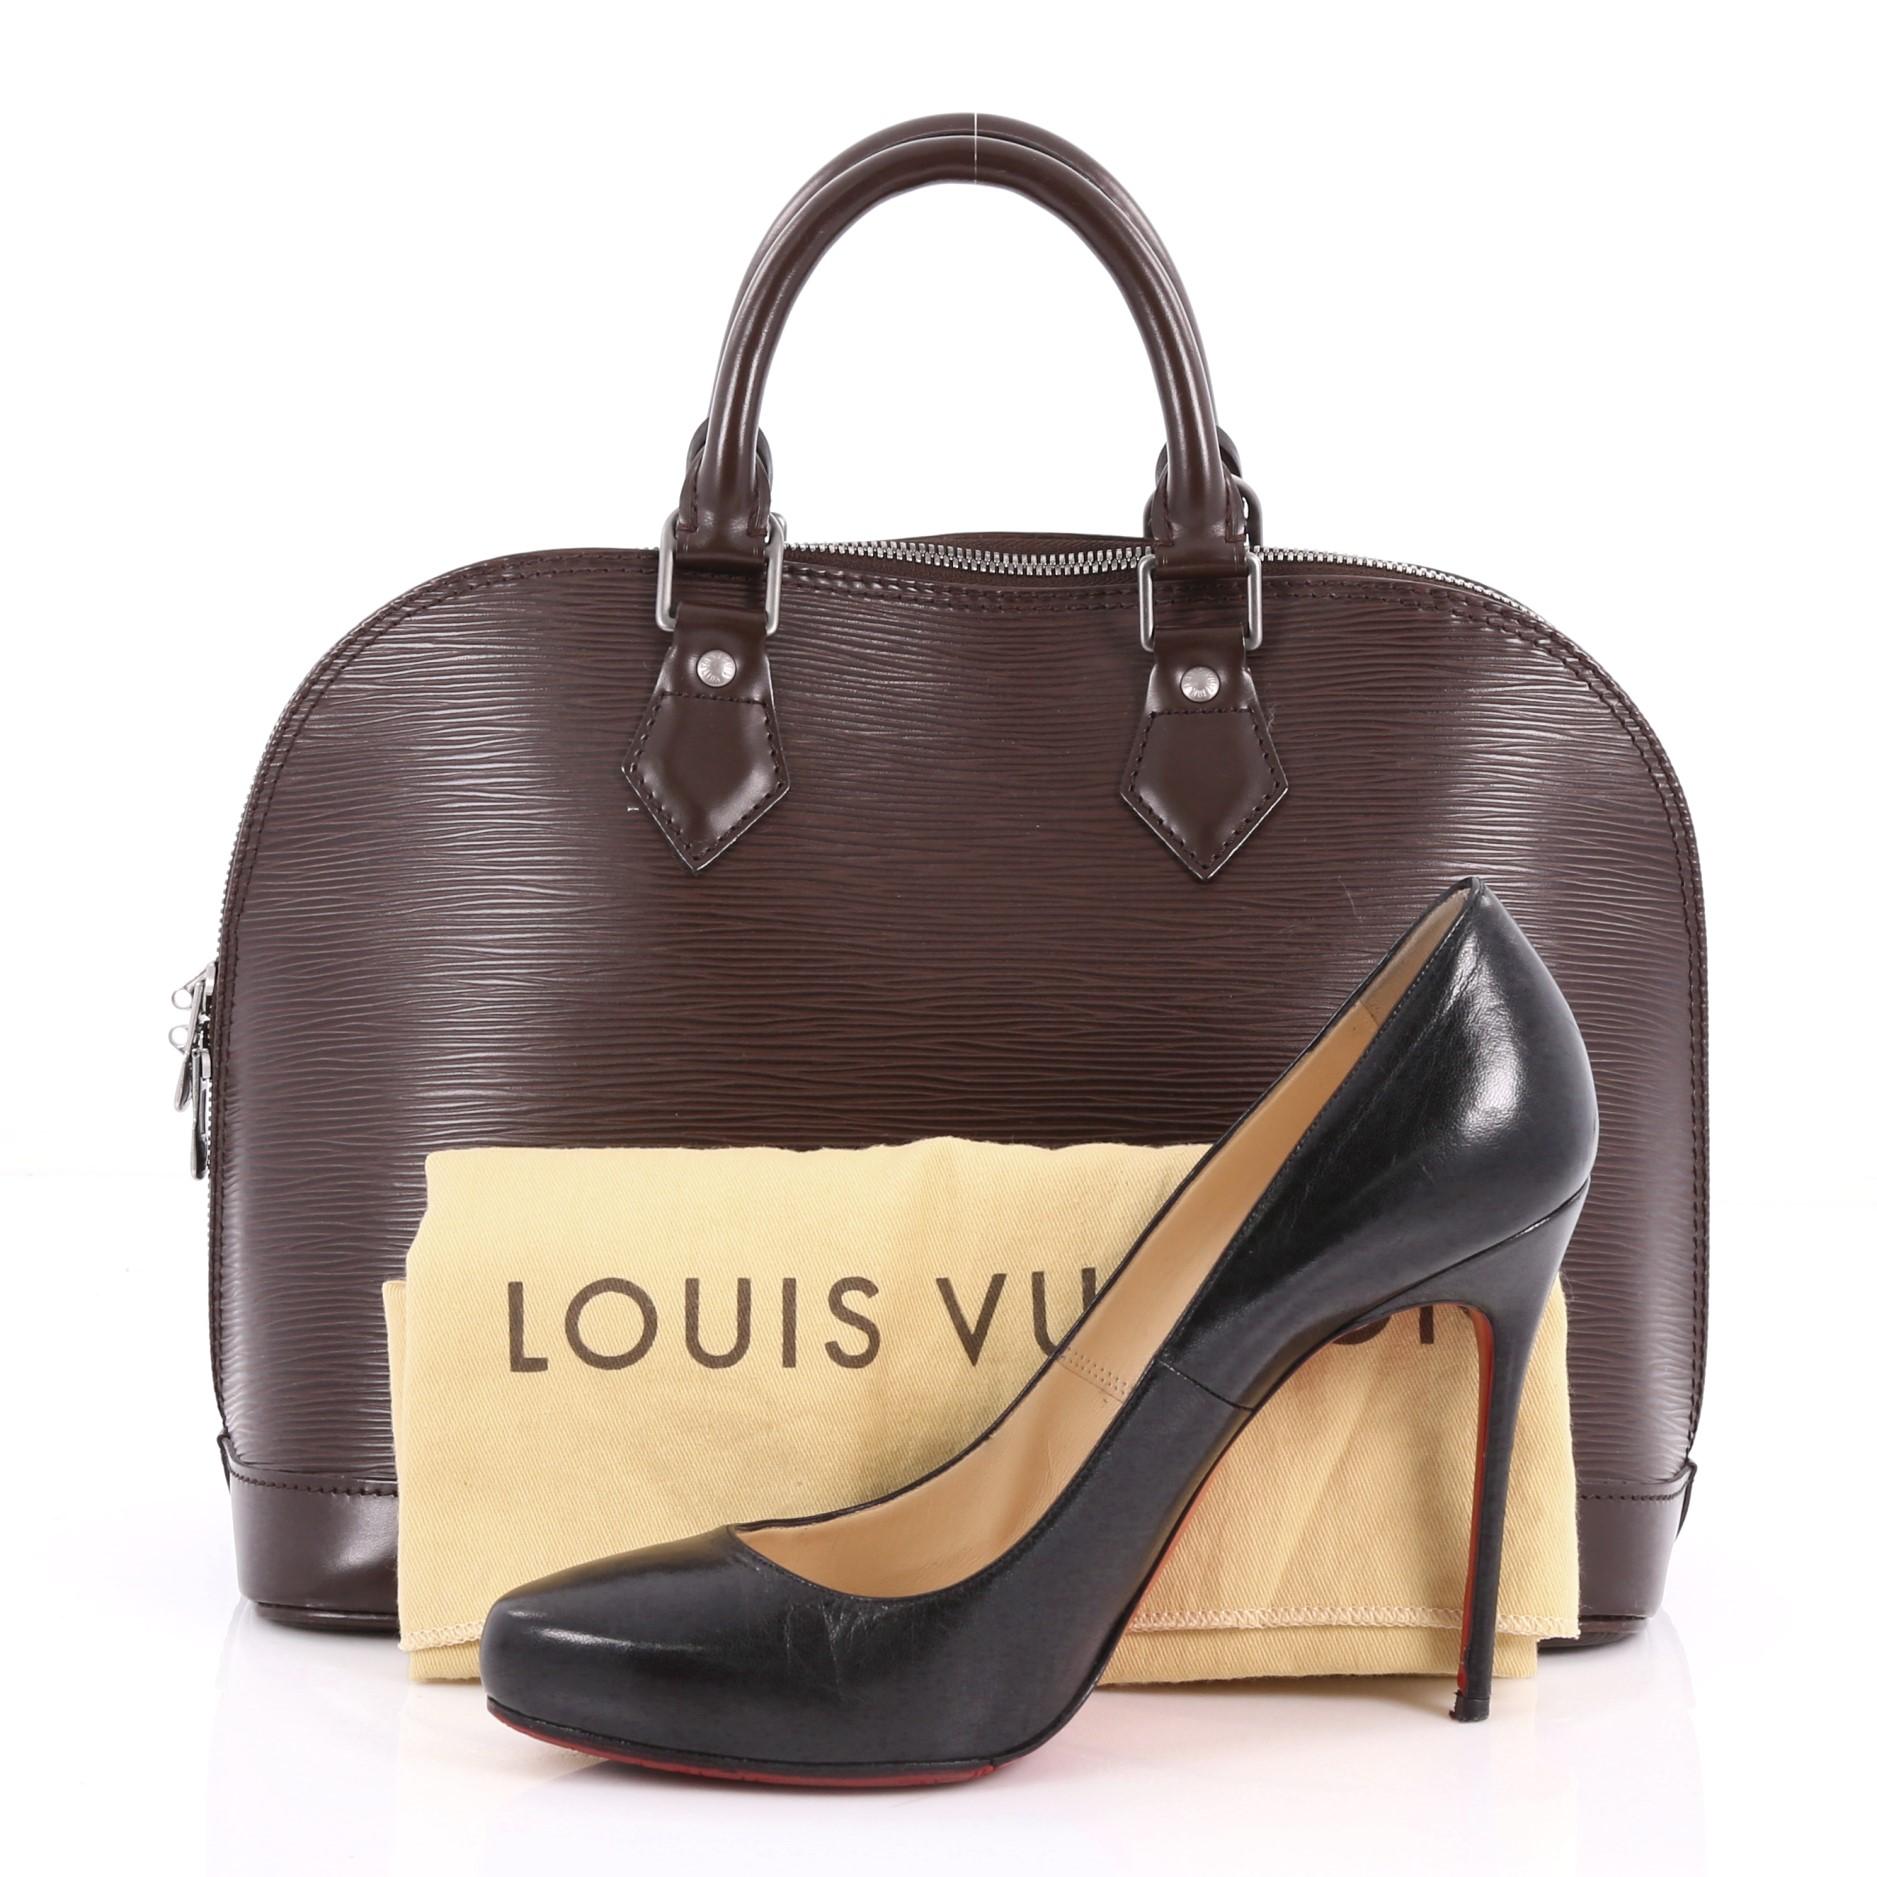 This authentic Louis Vuitton Alma Handbag Epi Leather PM is elegant and classic. Constructed from Louis Vuitton's signature brown epi leather, this iconic bag features dual rolled handles, a sturdy reinforced base, standout contrast stitching, a